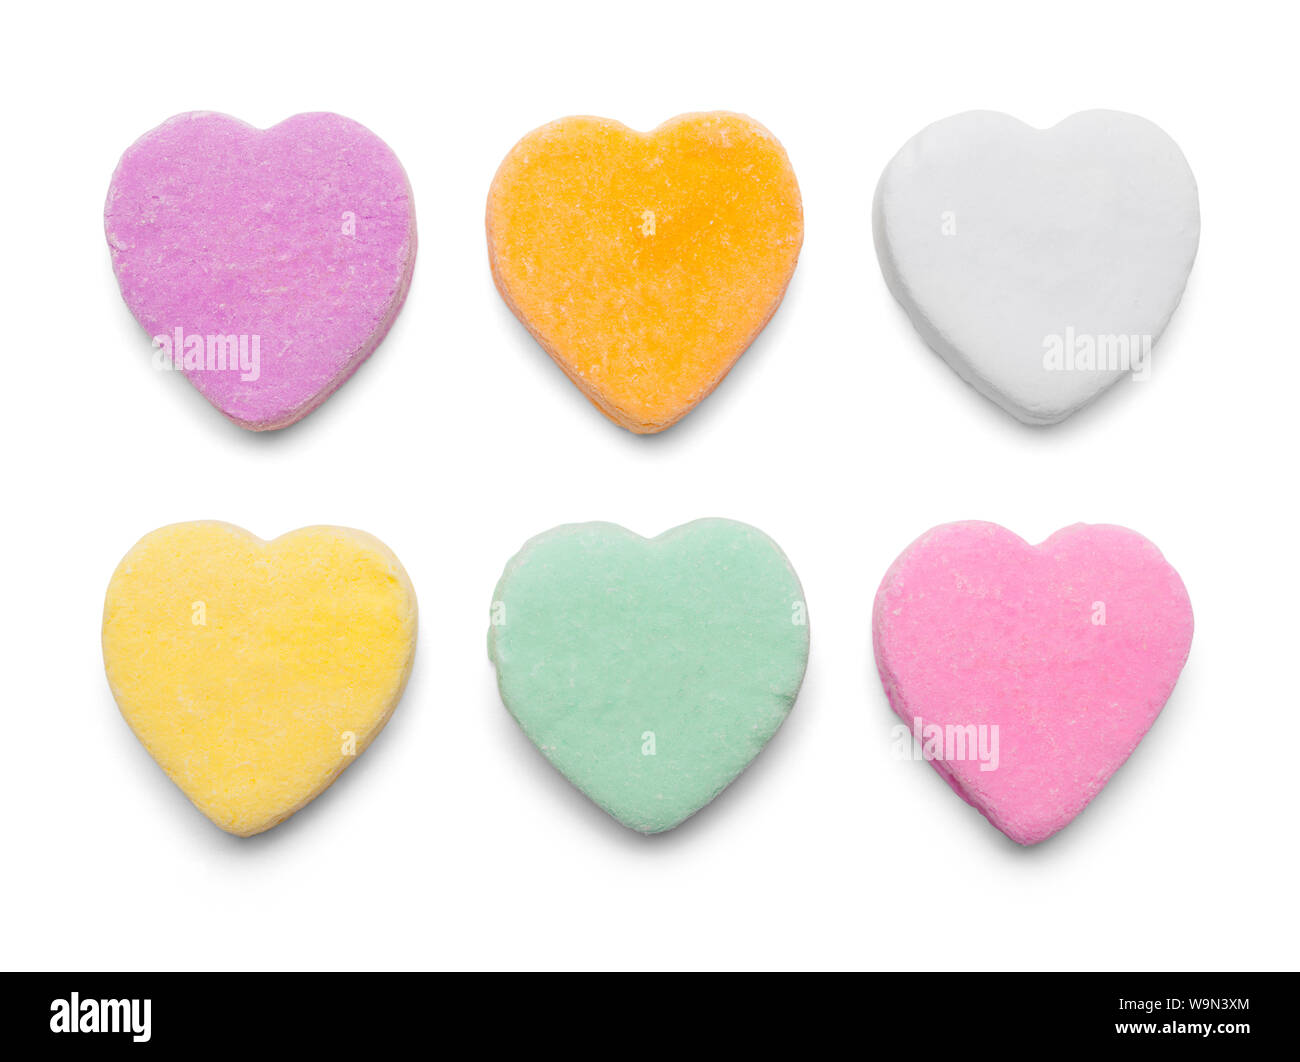 Valentines Candy Hearts Isolated on White Background. Stock Photo